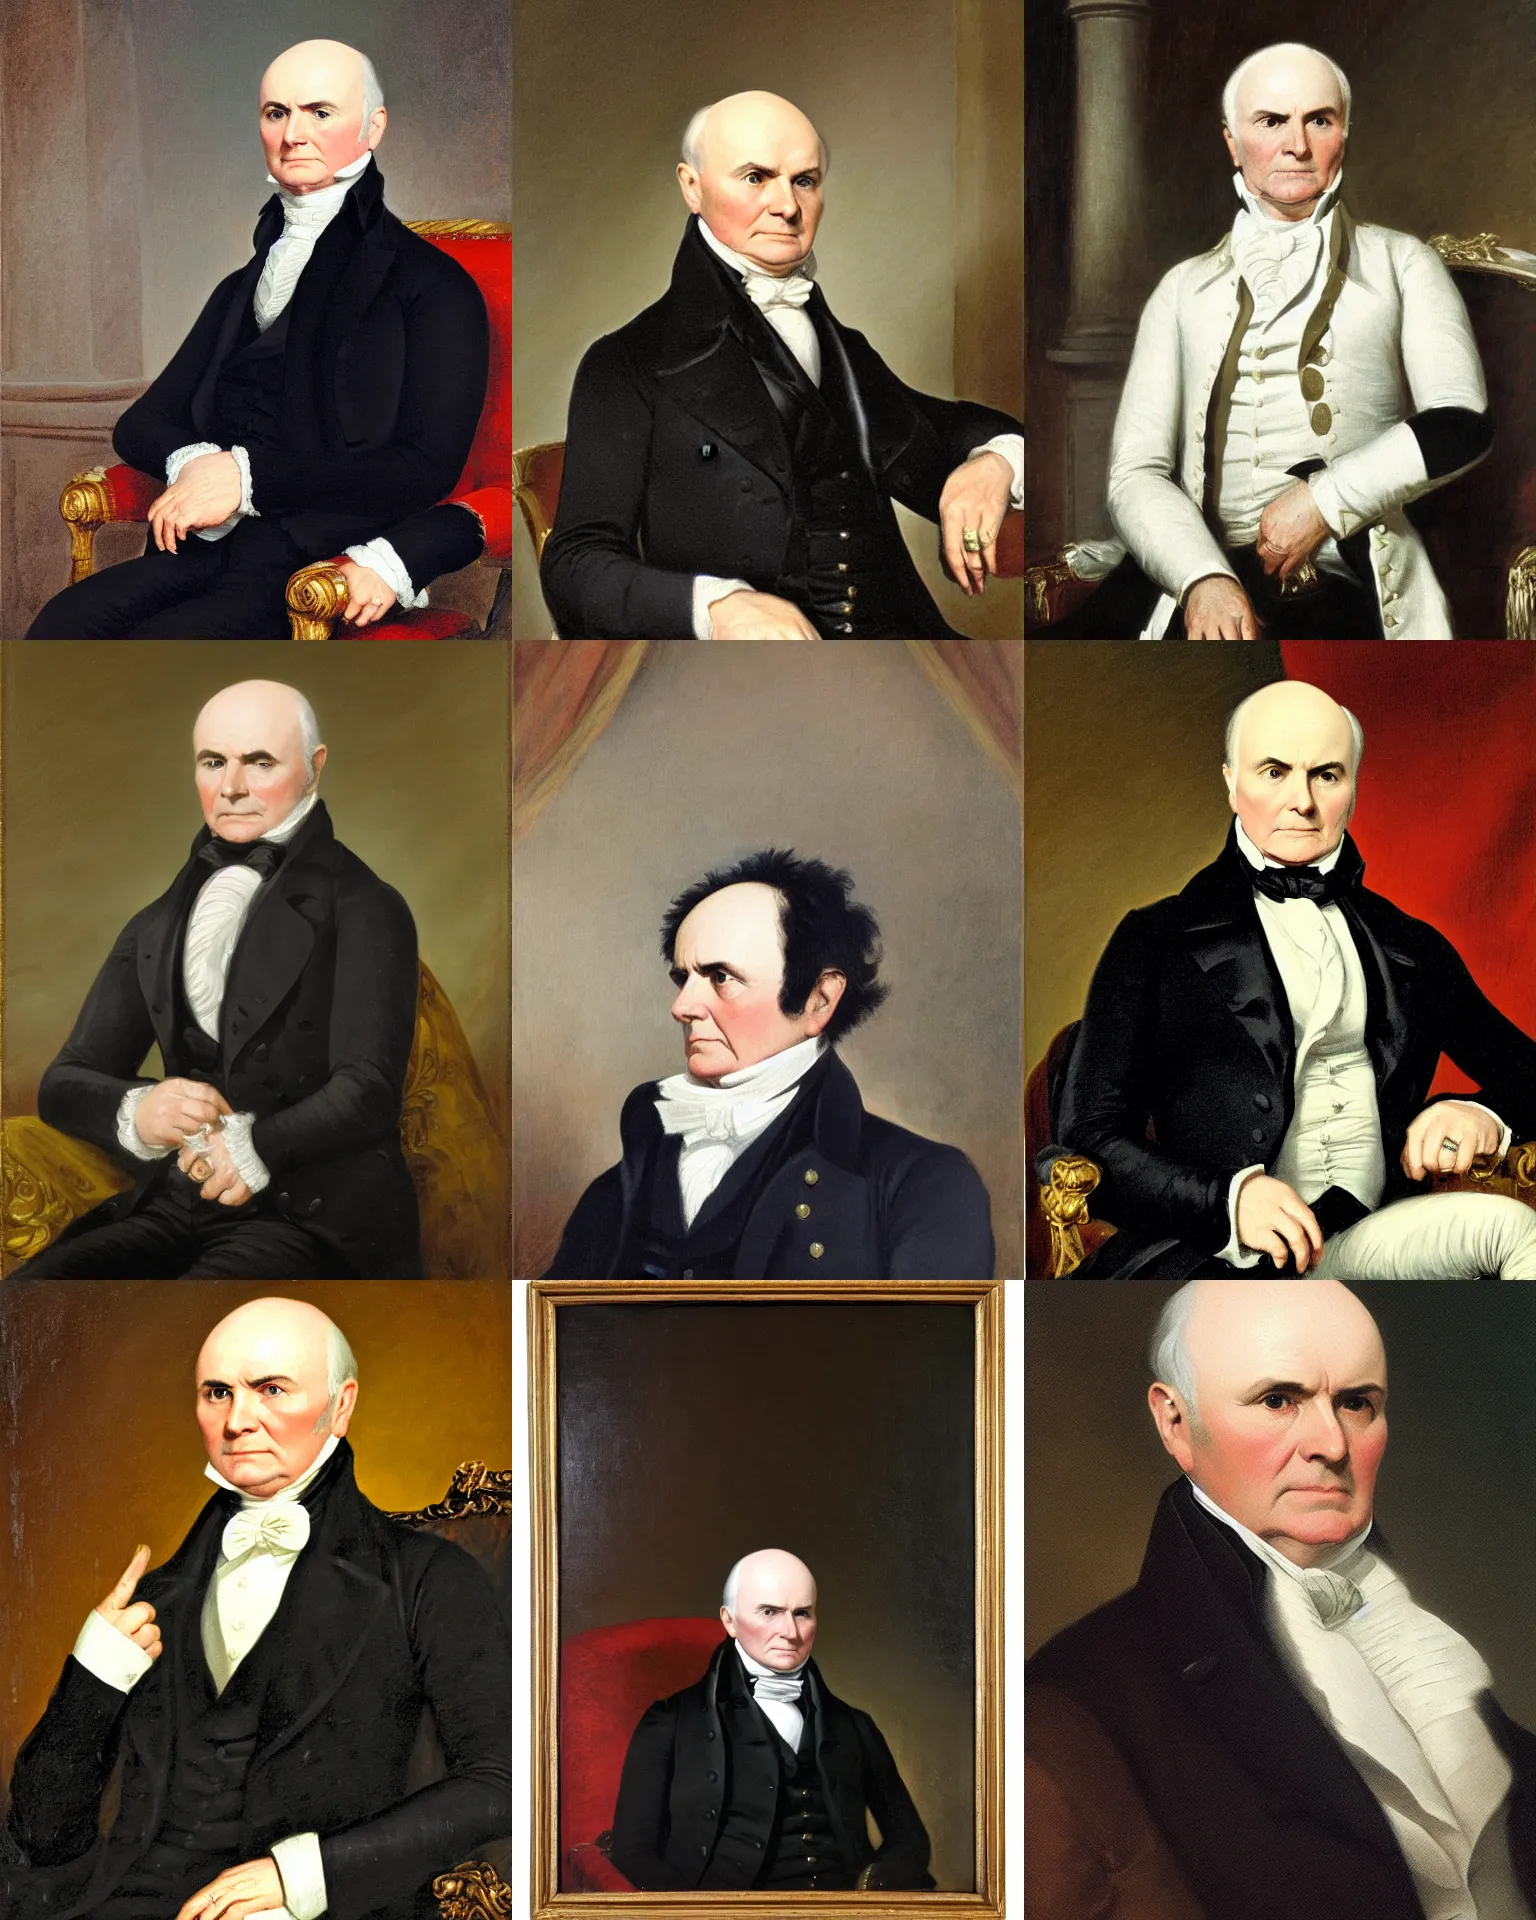 Prompt: John Quincy Adams, 6th President of the United States, 1825-1829, Portrait by George Peter Alexander Healy in 1858. Oil on canvas, 62 x 47 inches, White House Collection/White House Historical Association